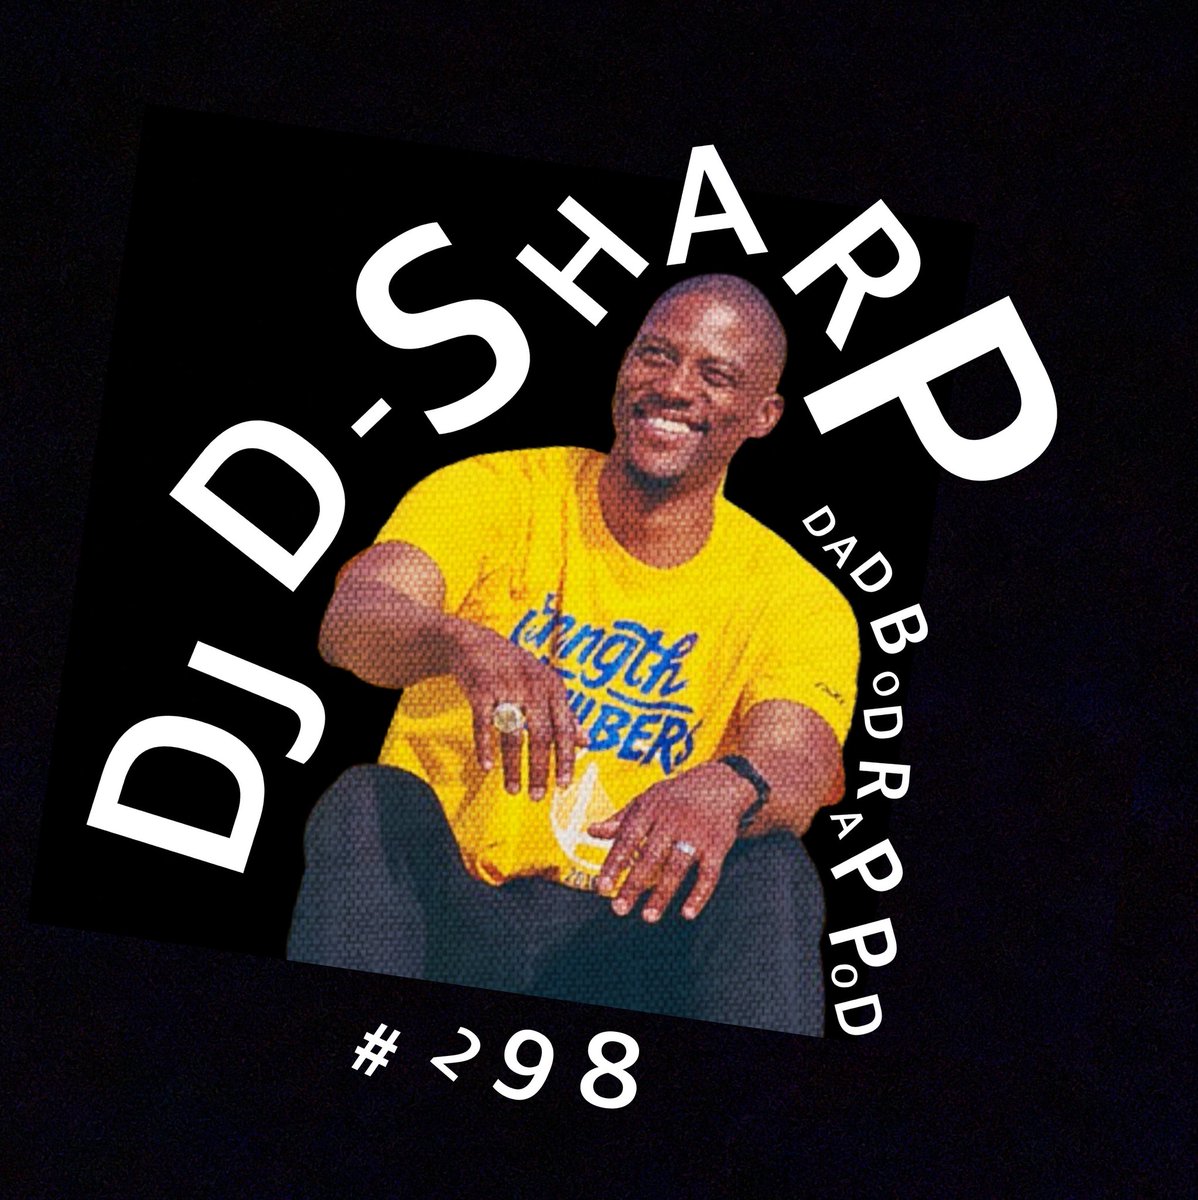 I wasn't able to present for the interview but I want to thank @djdsharp for making the homie Traxamillon's music an integral part of the Warriors home game experience. D Sharp talks about his Oakland roots, working for the Dubs, and his new music. linktr.ee/dbrp